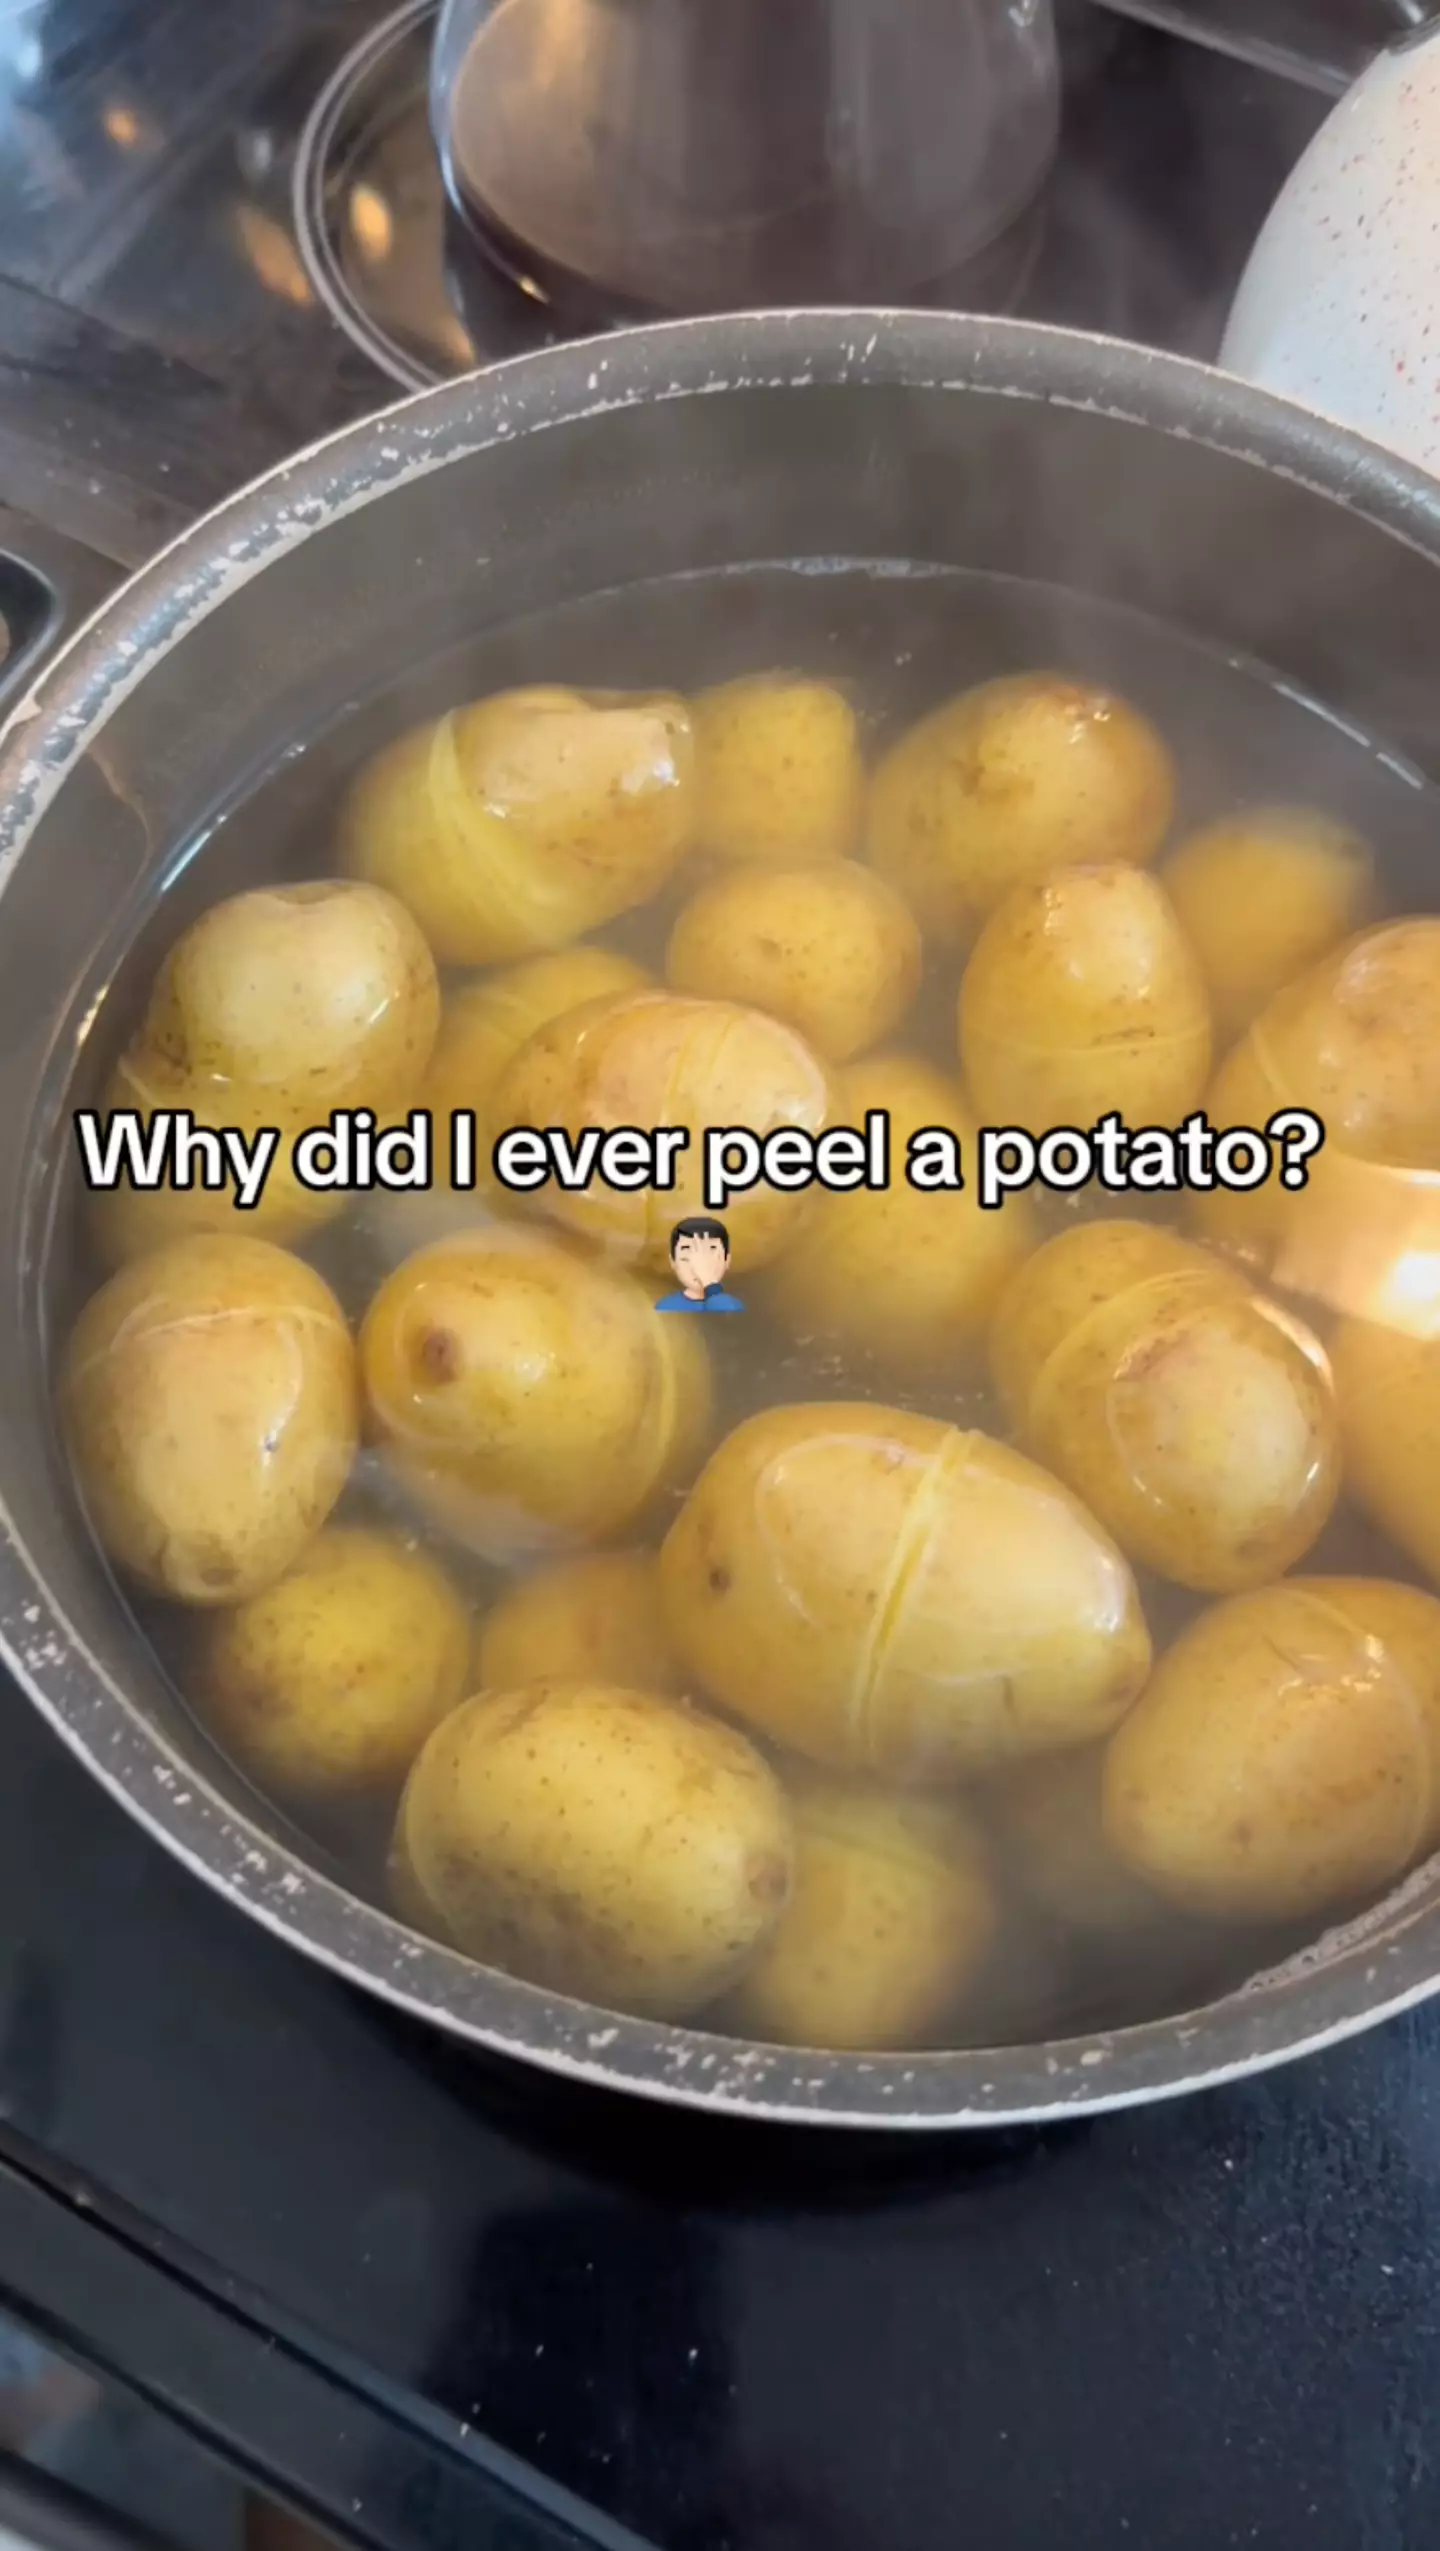 The woman scraped a line around the potatoes before boiling them.